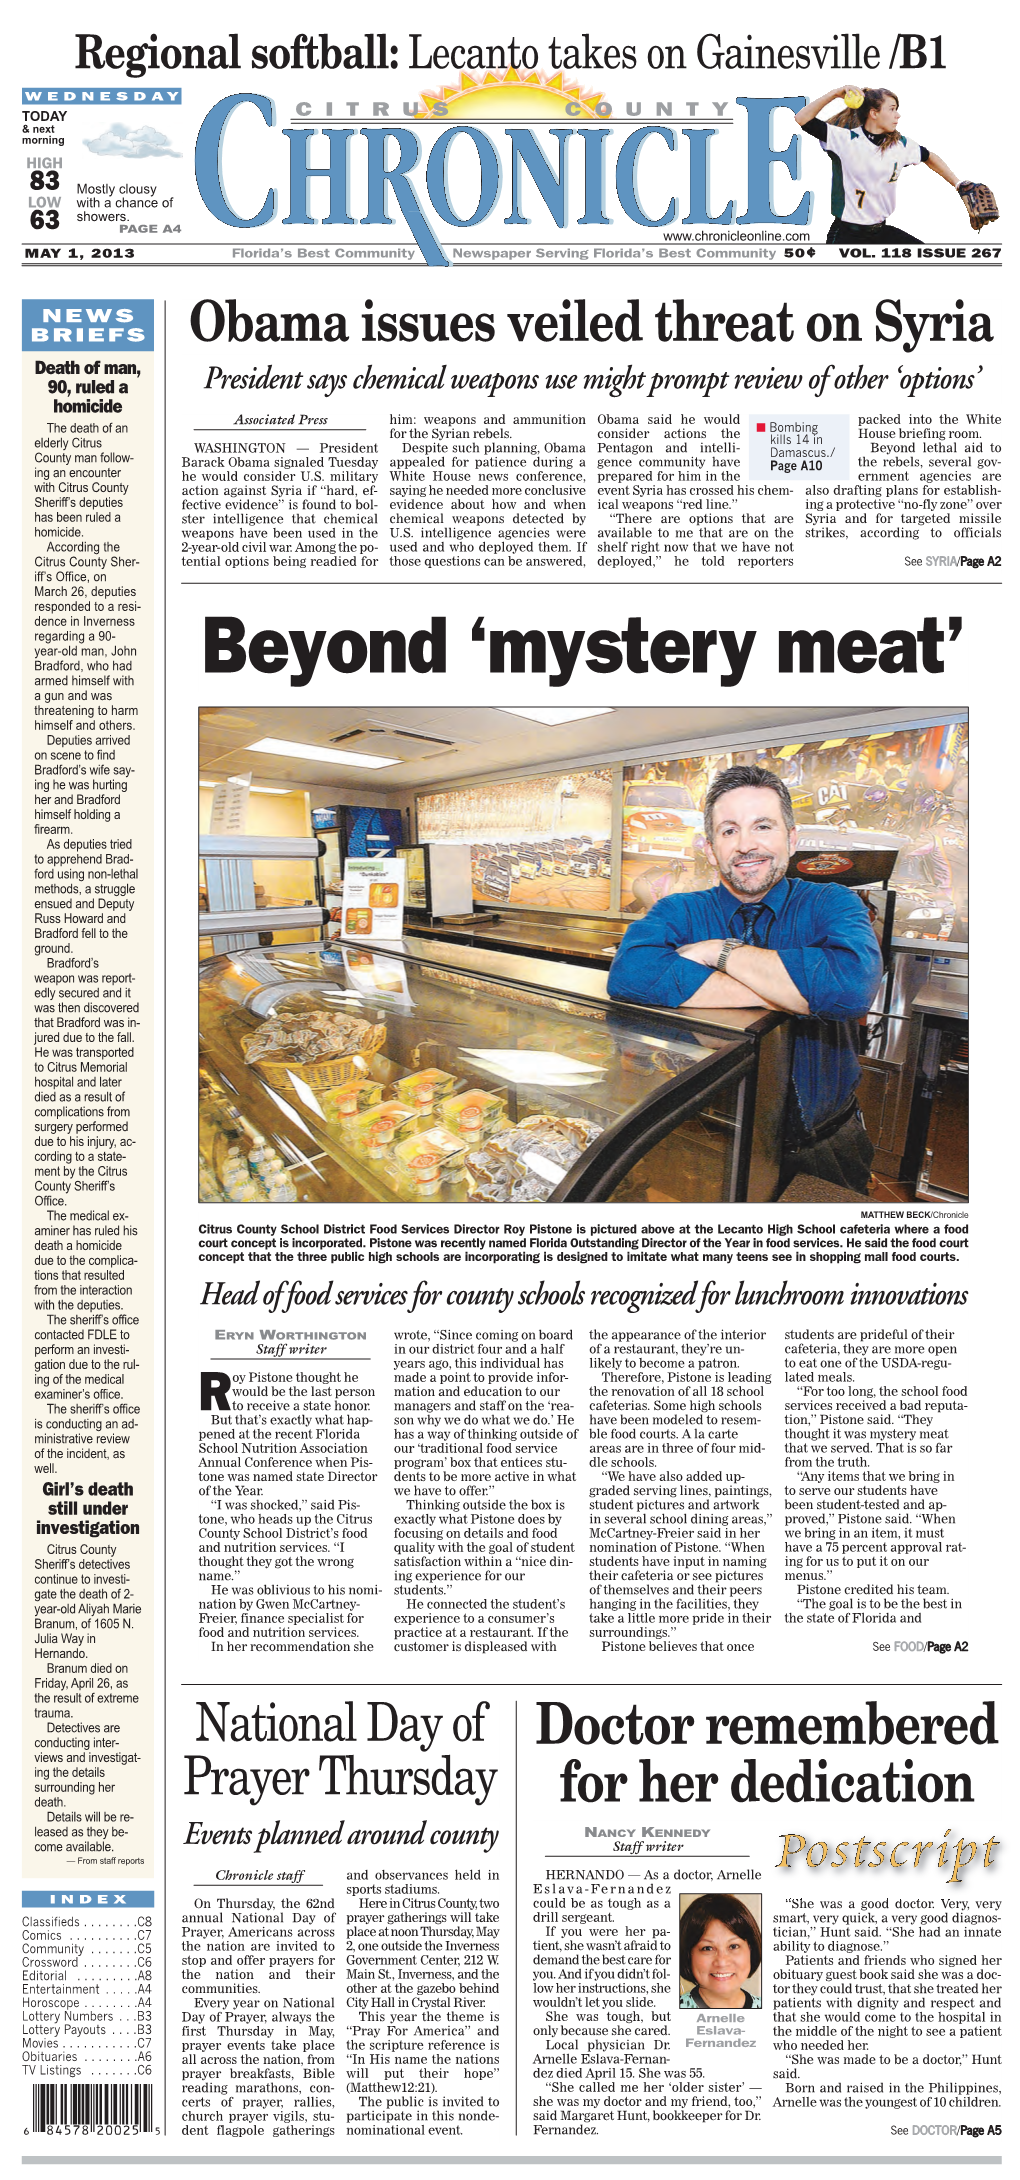 Beyond 'Mystery Meat'